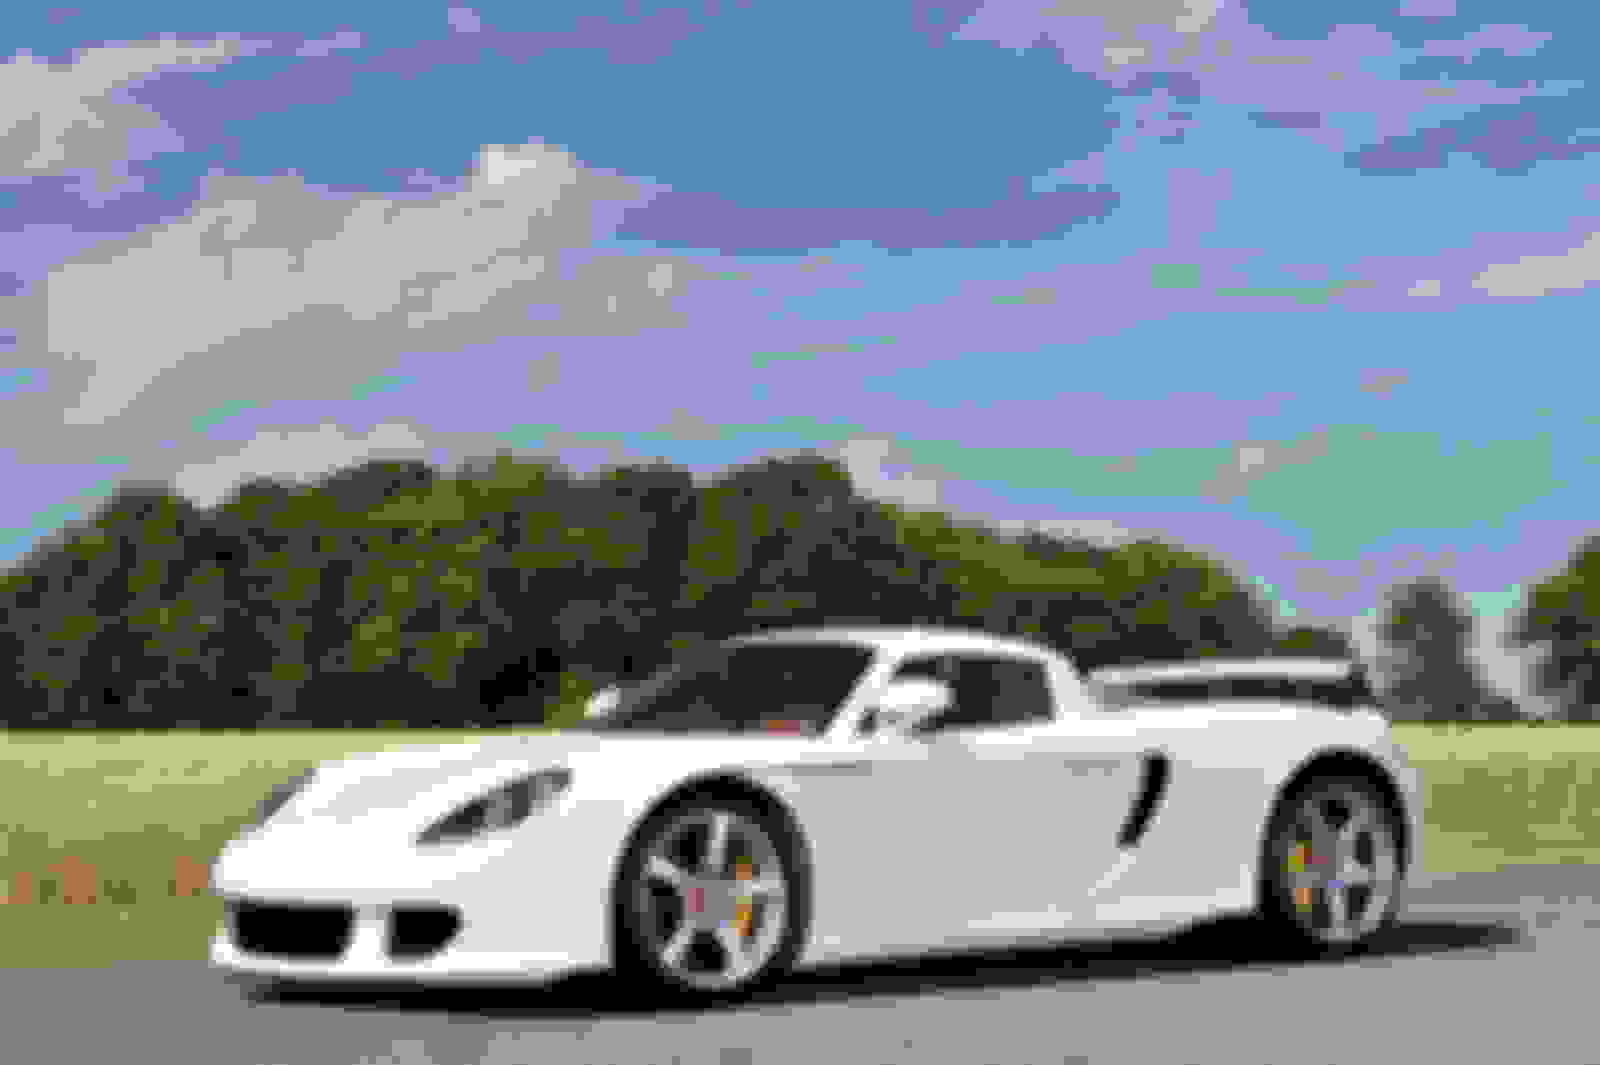 The Carrera GT Picture Thread! - Page 238 - Teamspeed.com